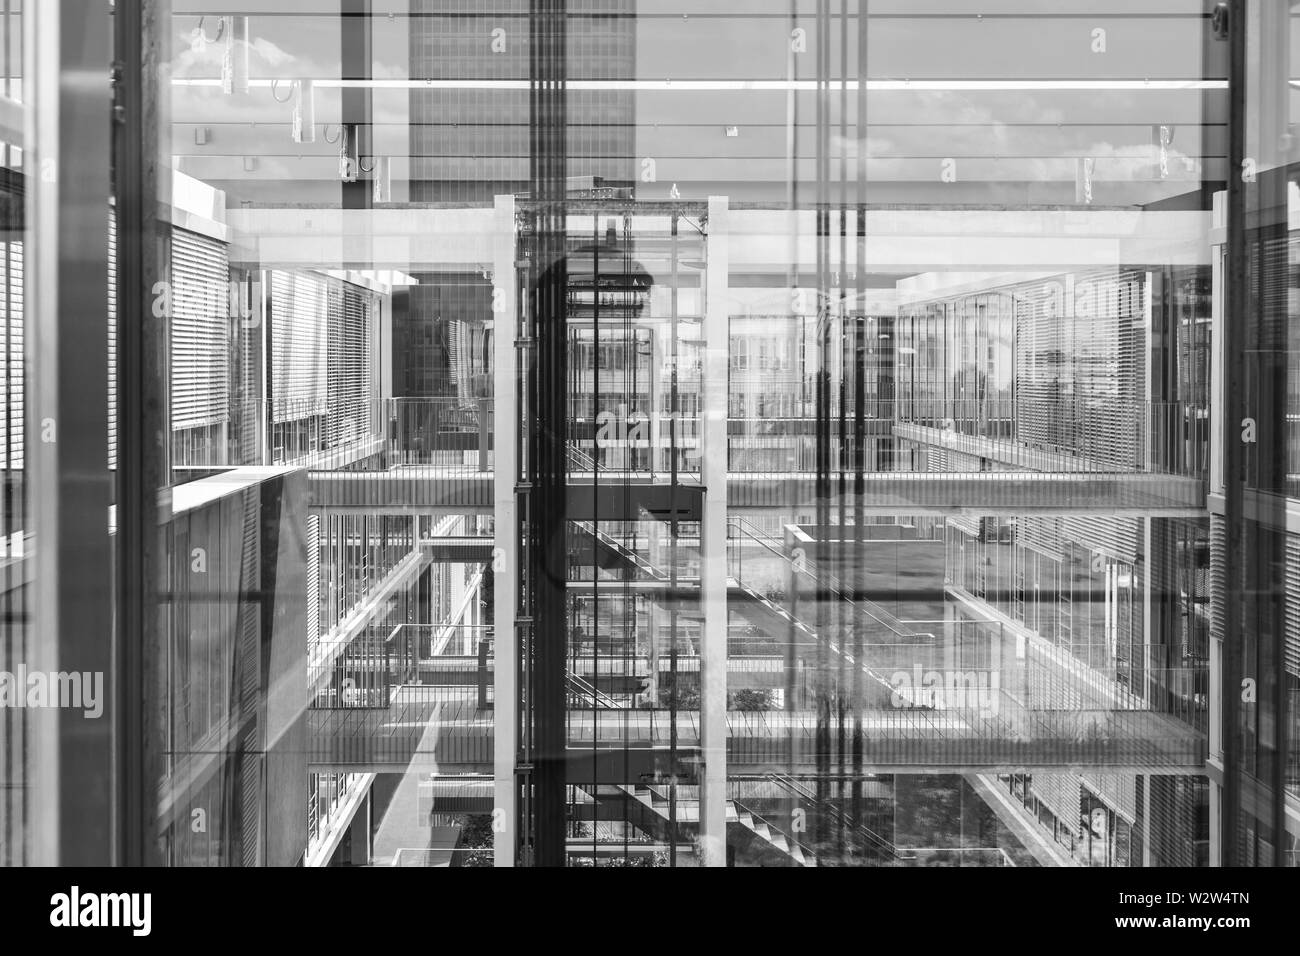 Abstract window reflections in morden office building. Black and white photo. Stock Photo